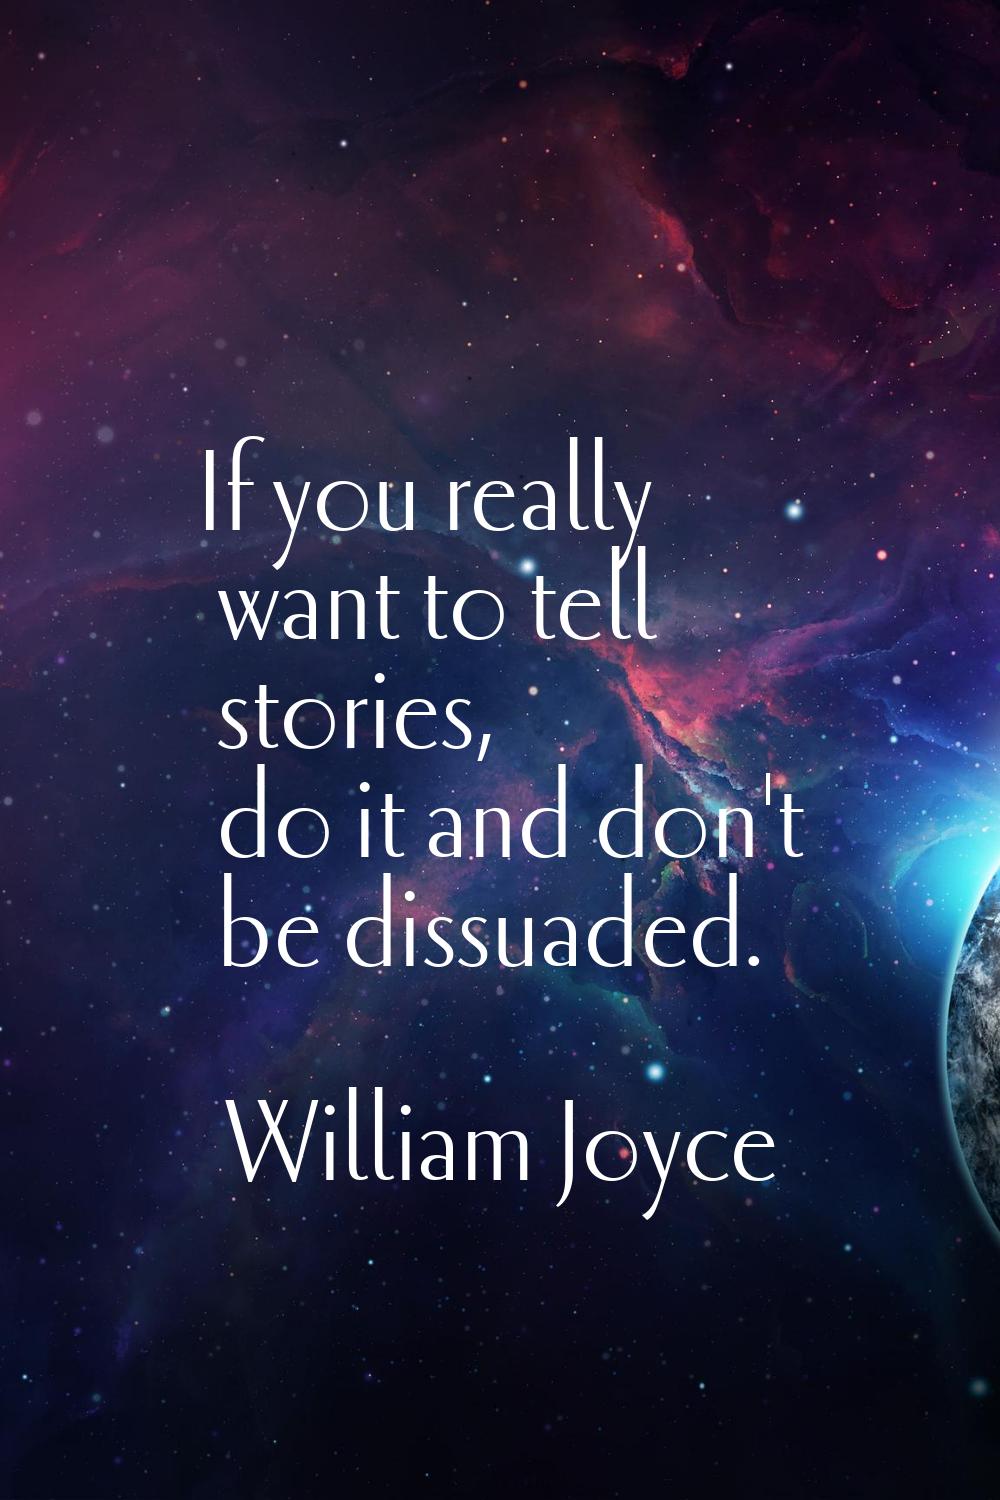 If you really want to tell stories, do it and don't be dissuaded.